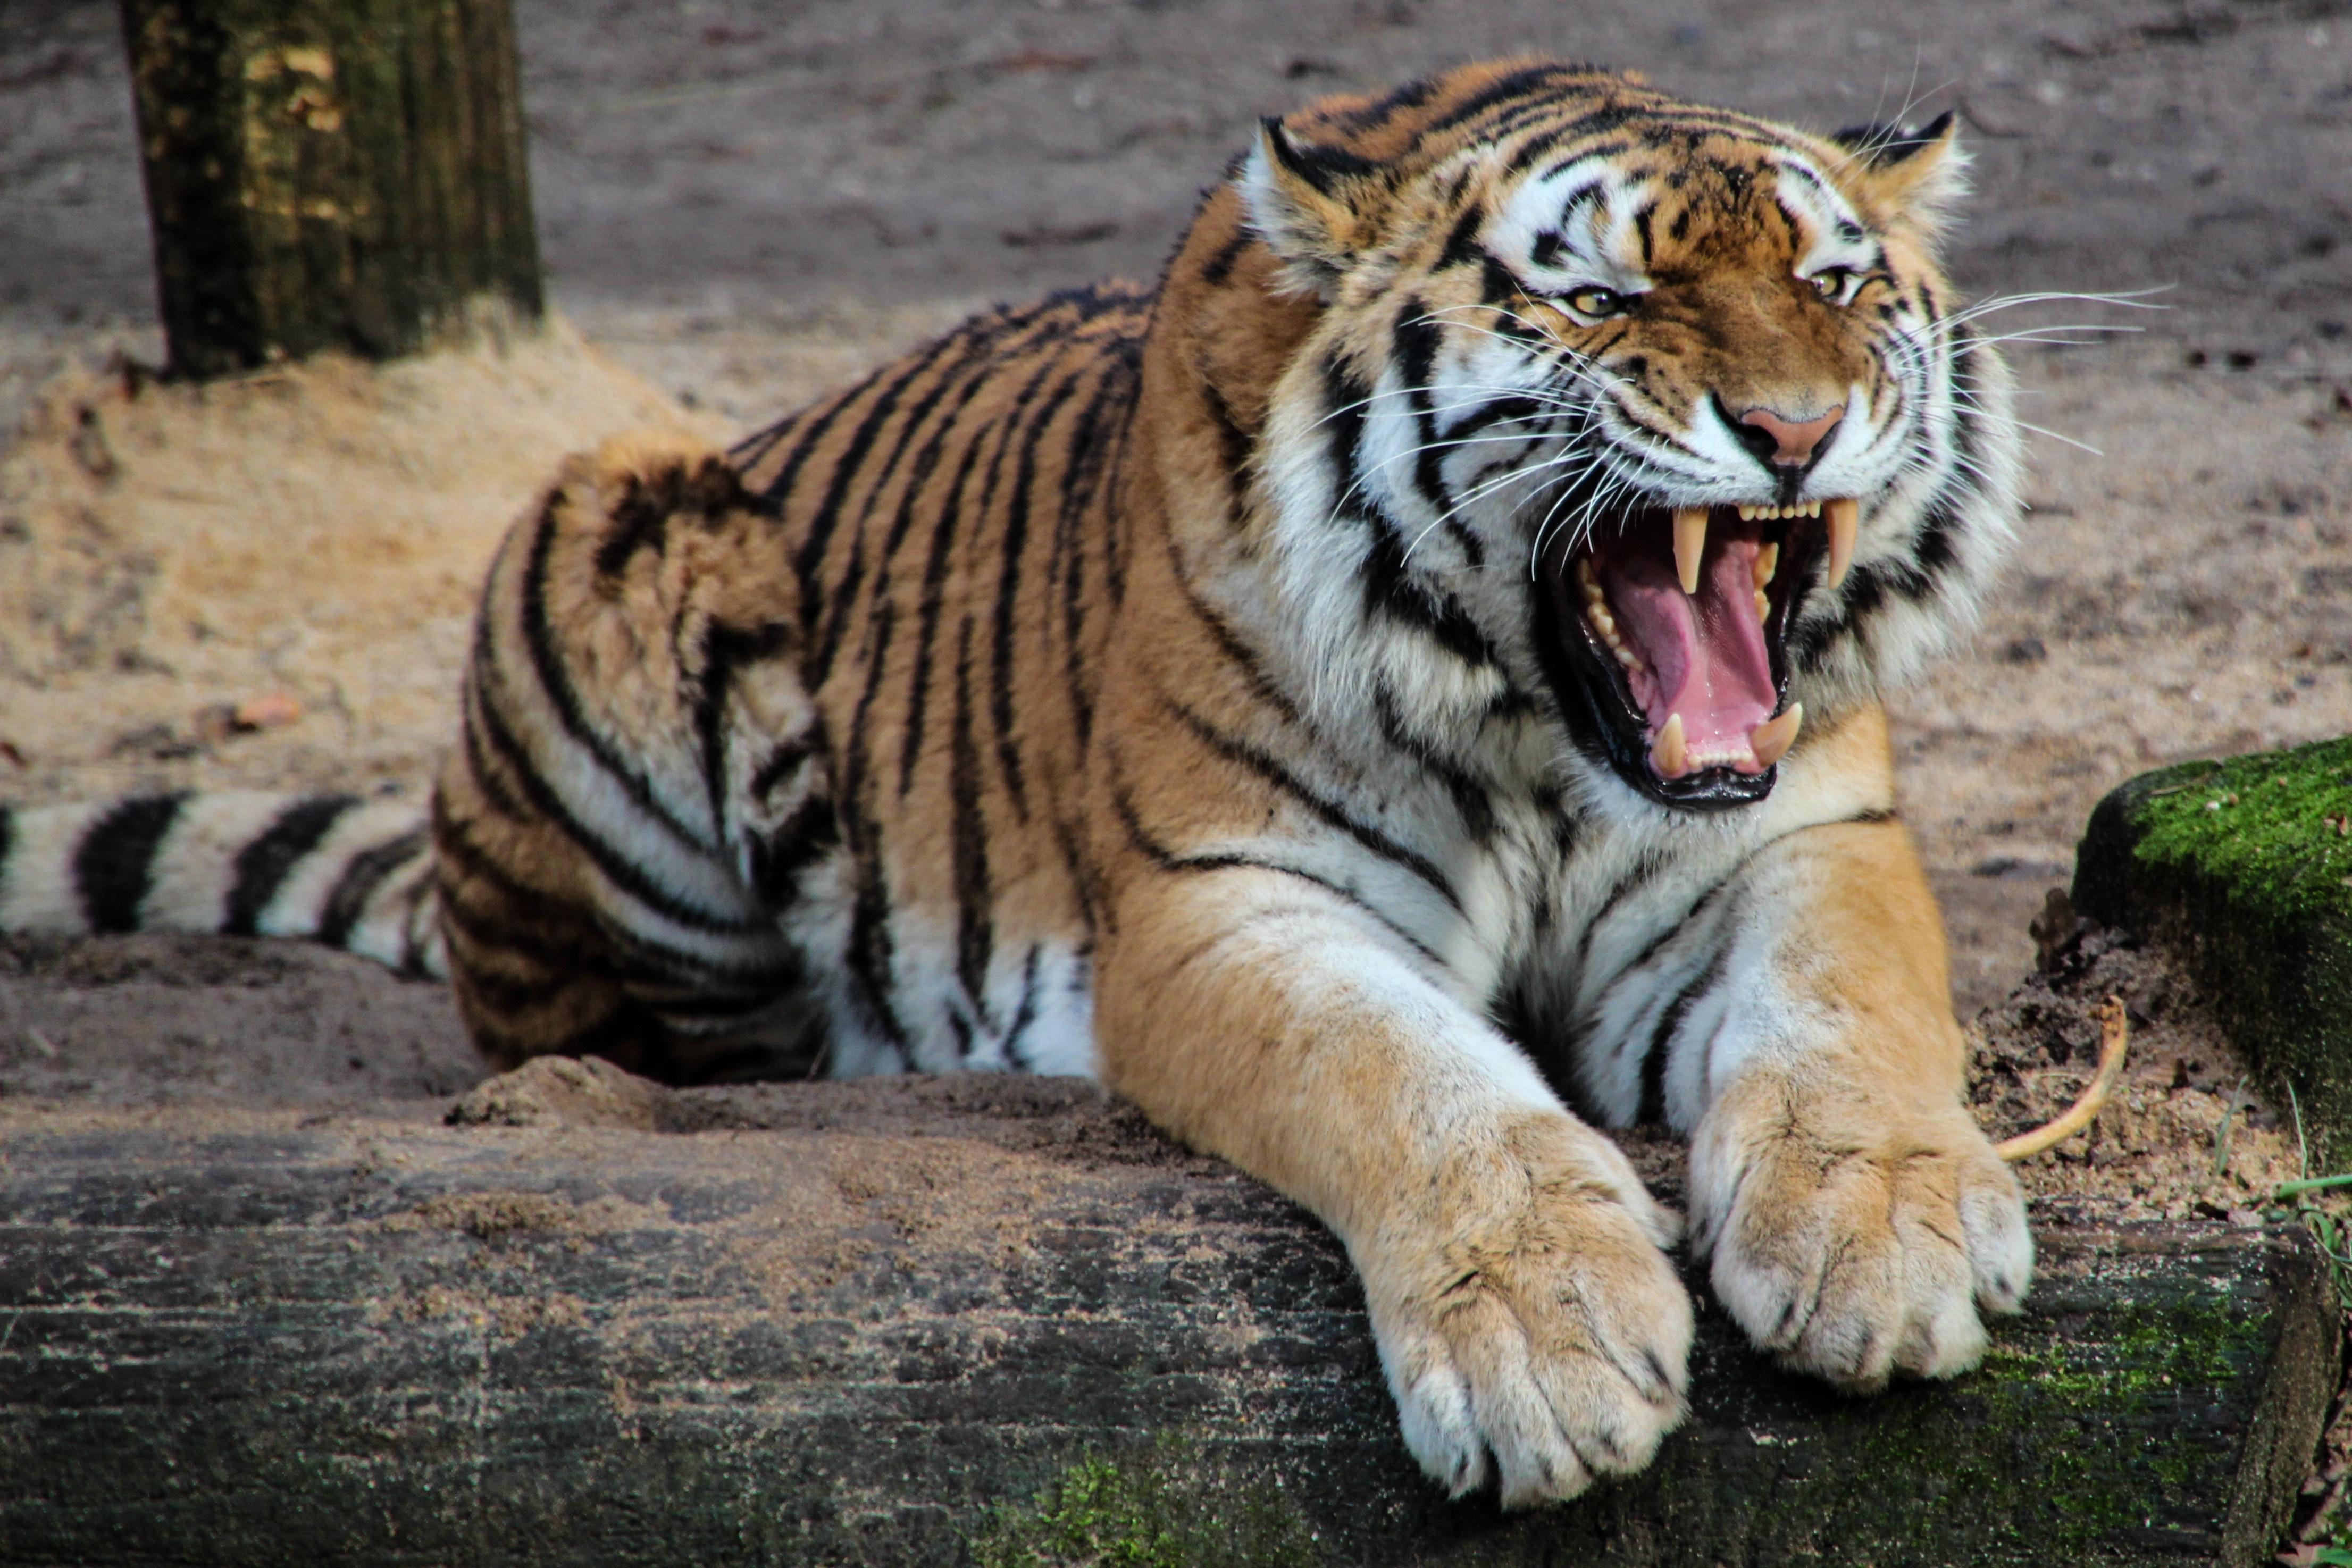 Black White and Yellow Tiger Sitting on a Beige Sand during